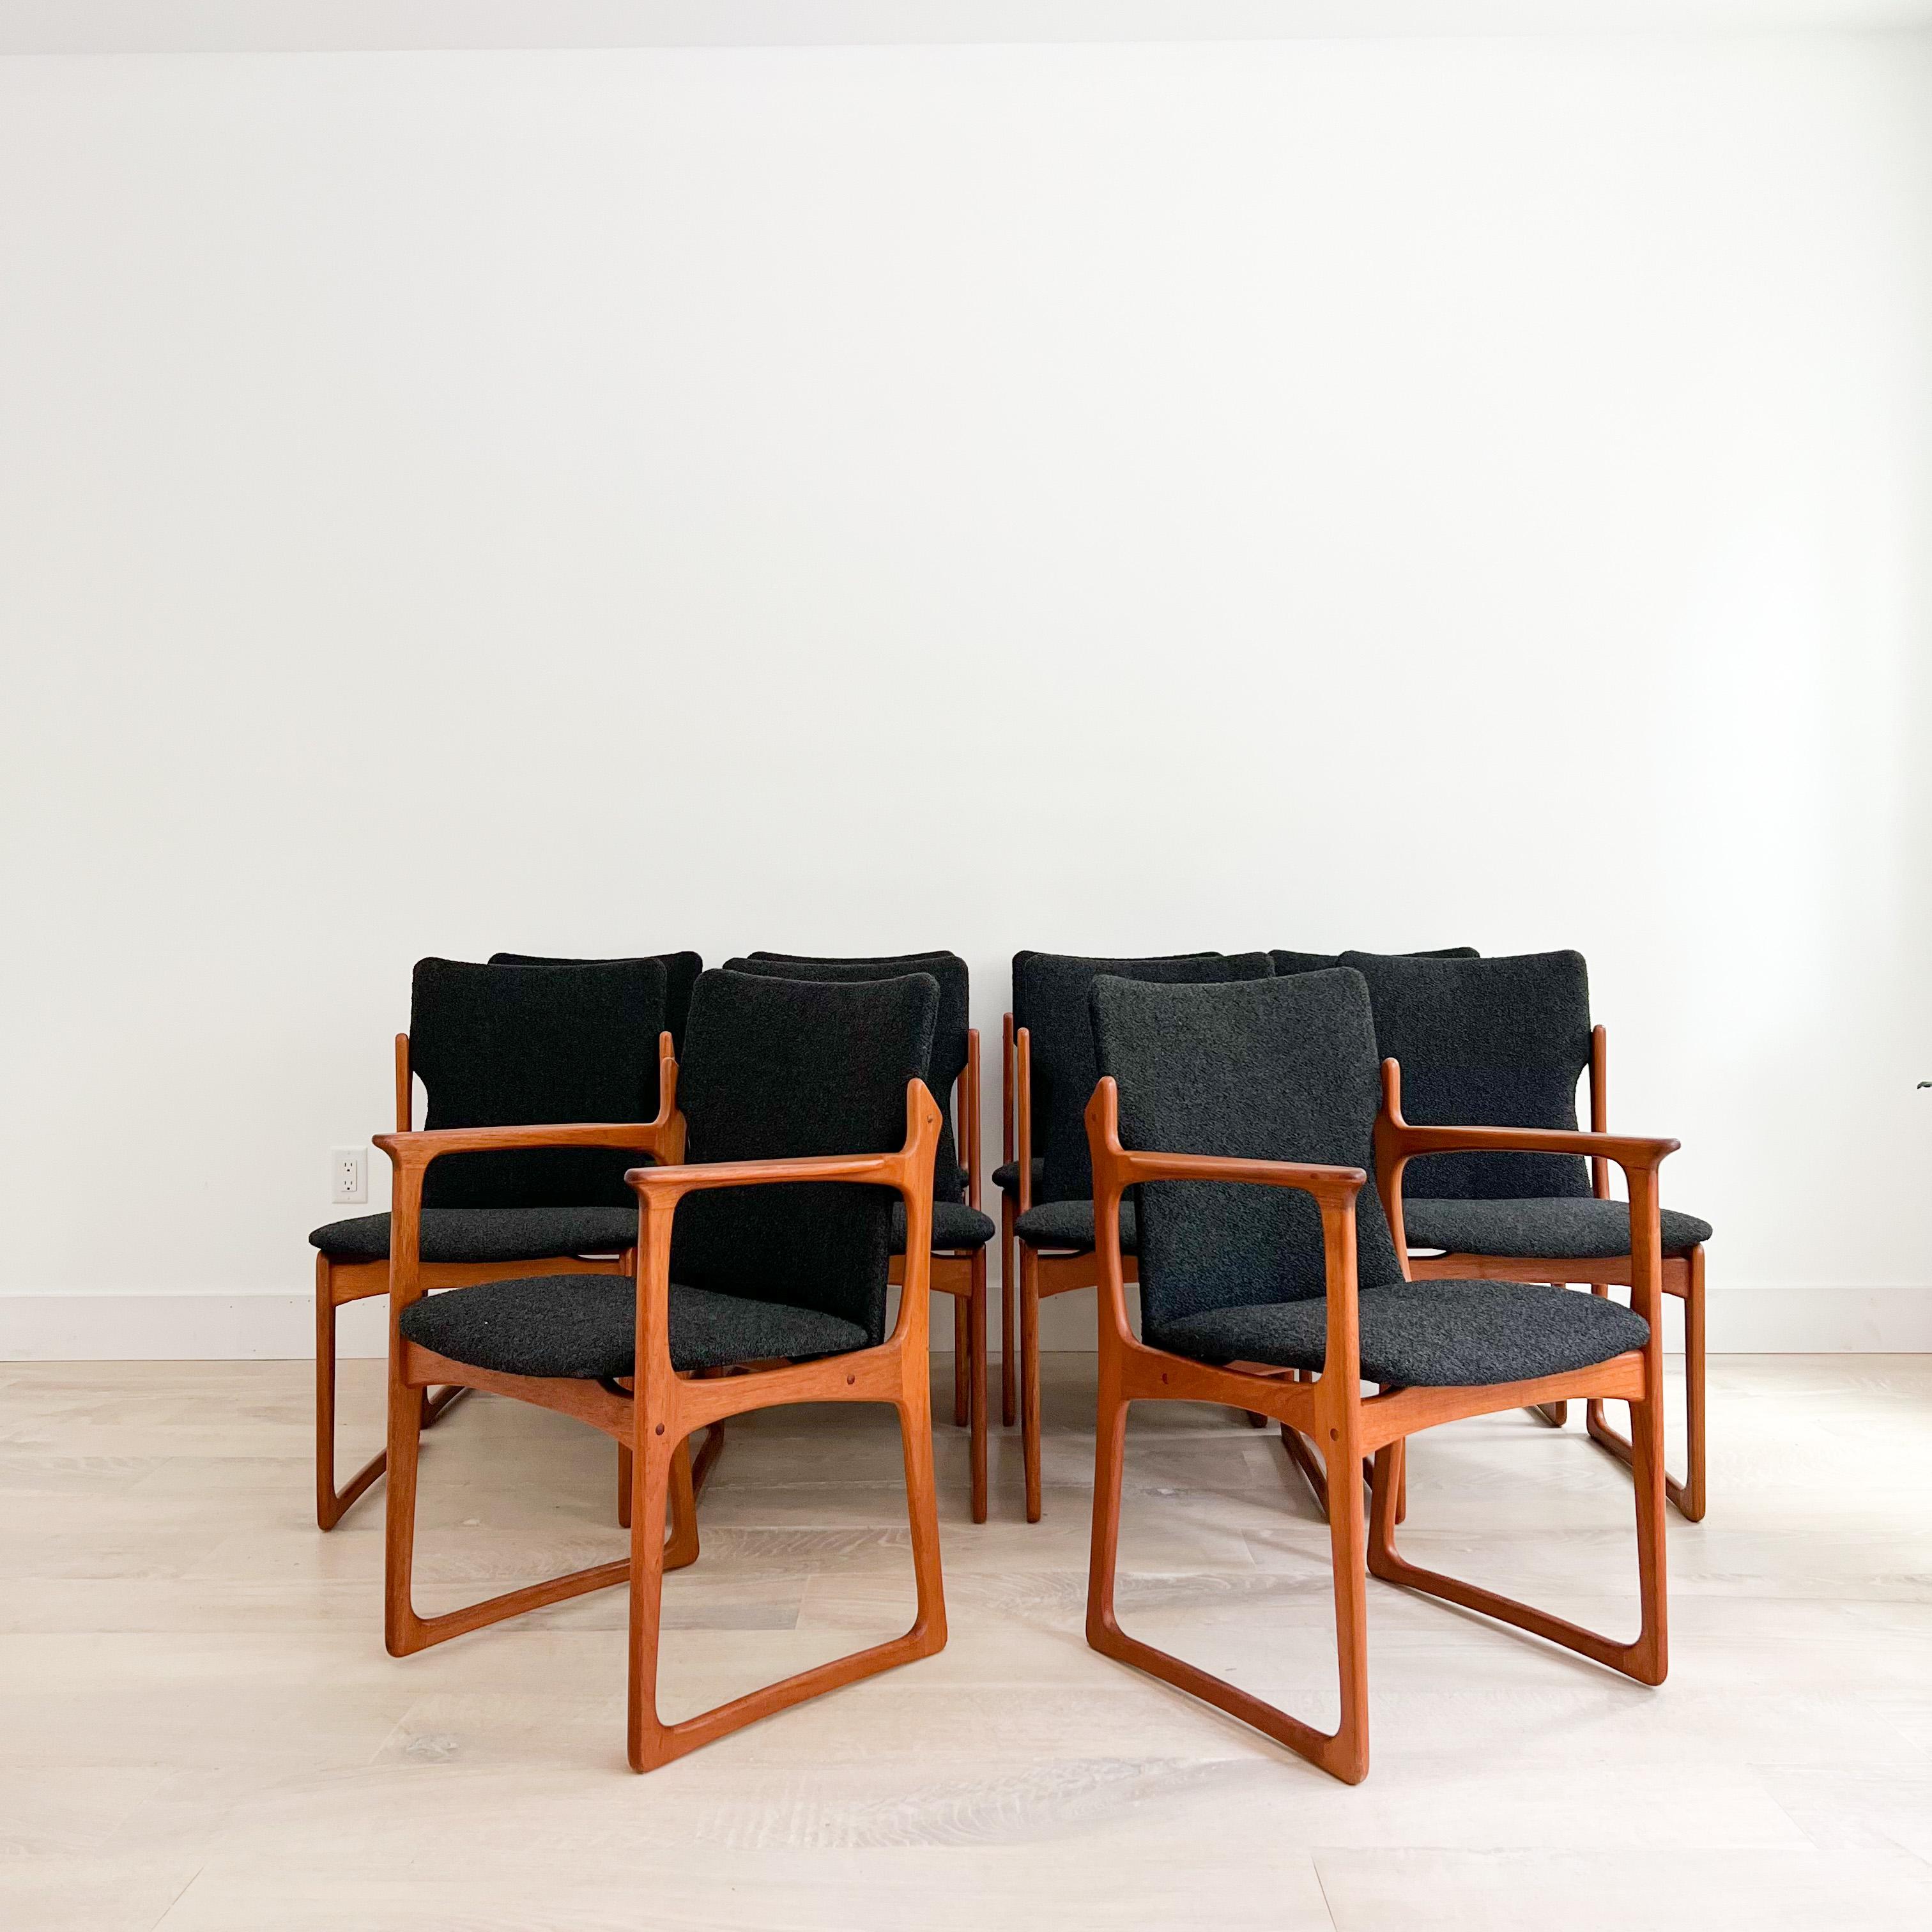 Set of 10 Danish Teak sculpted frame dining chairs manufactured by Vamdrup Stolefabrik. All new black boucle upholstery. Some light scuffing/scratching/darker lines on the chairs. 2 Captain chairs and 8 armless.